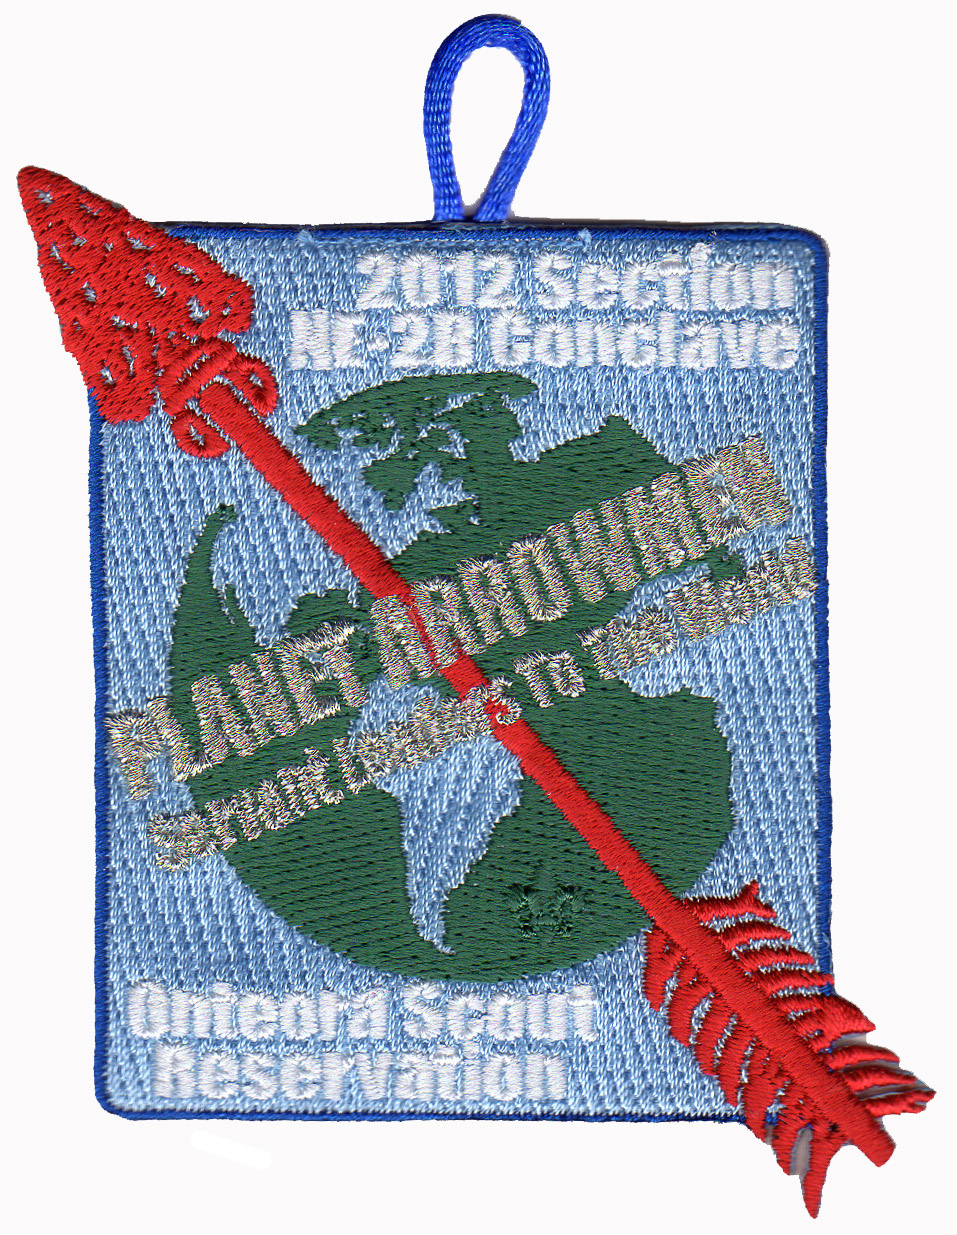 Order of the Arrow NE-2B Conclave 2012